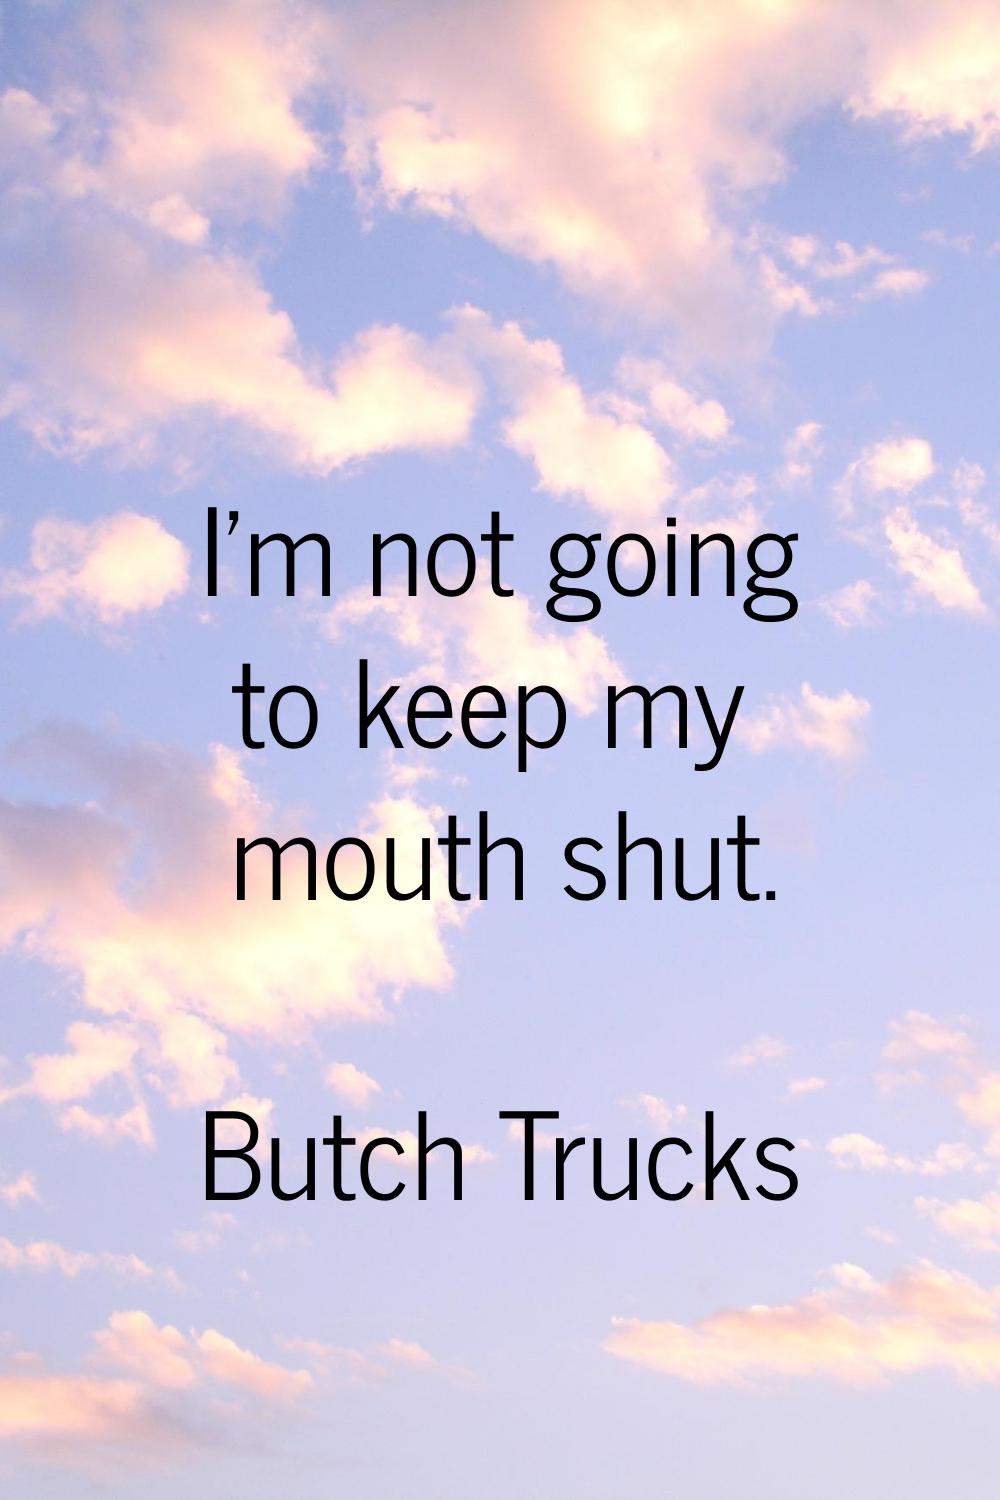 I'm not going to keep my mouth shut.